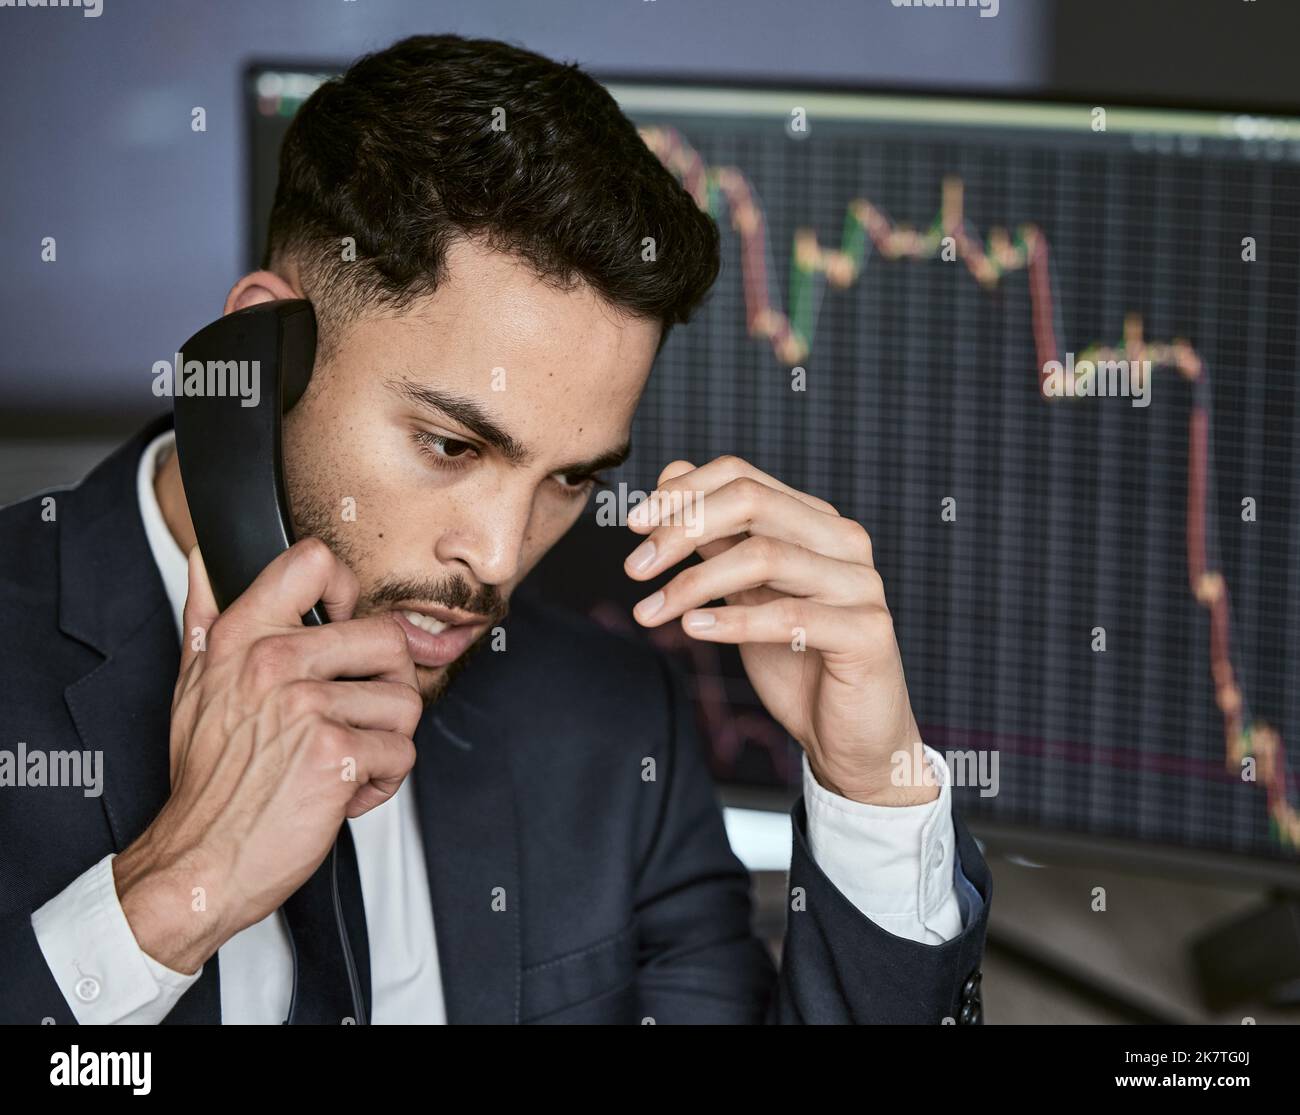 Stressed businessman on the phone, trading on the stock market during a financial crisis. Trader in a bear market with stocks crashing. Market crash Stock Photo